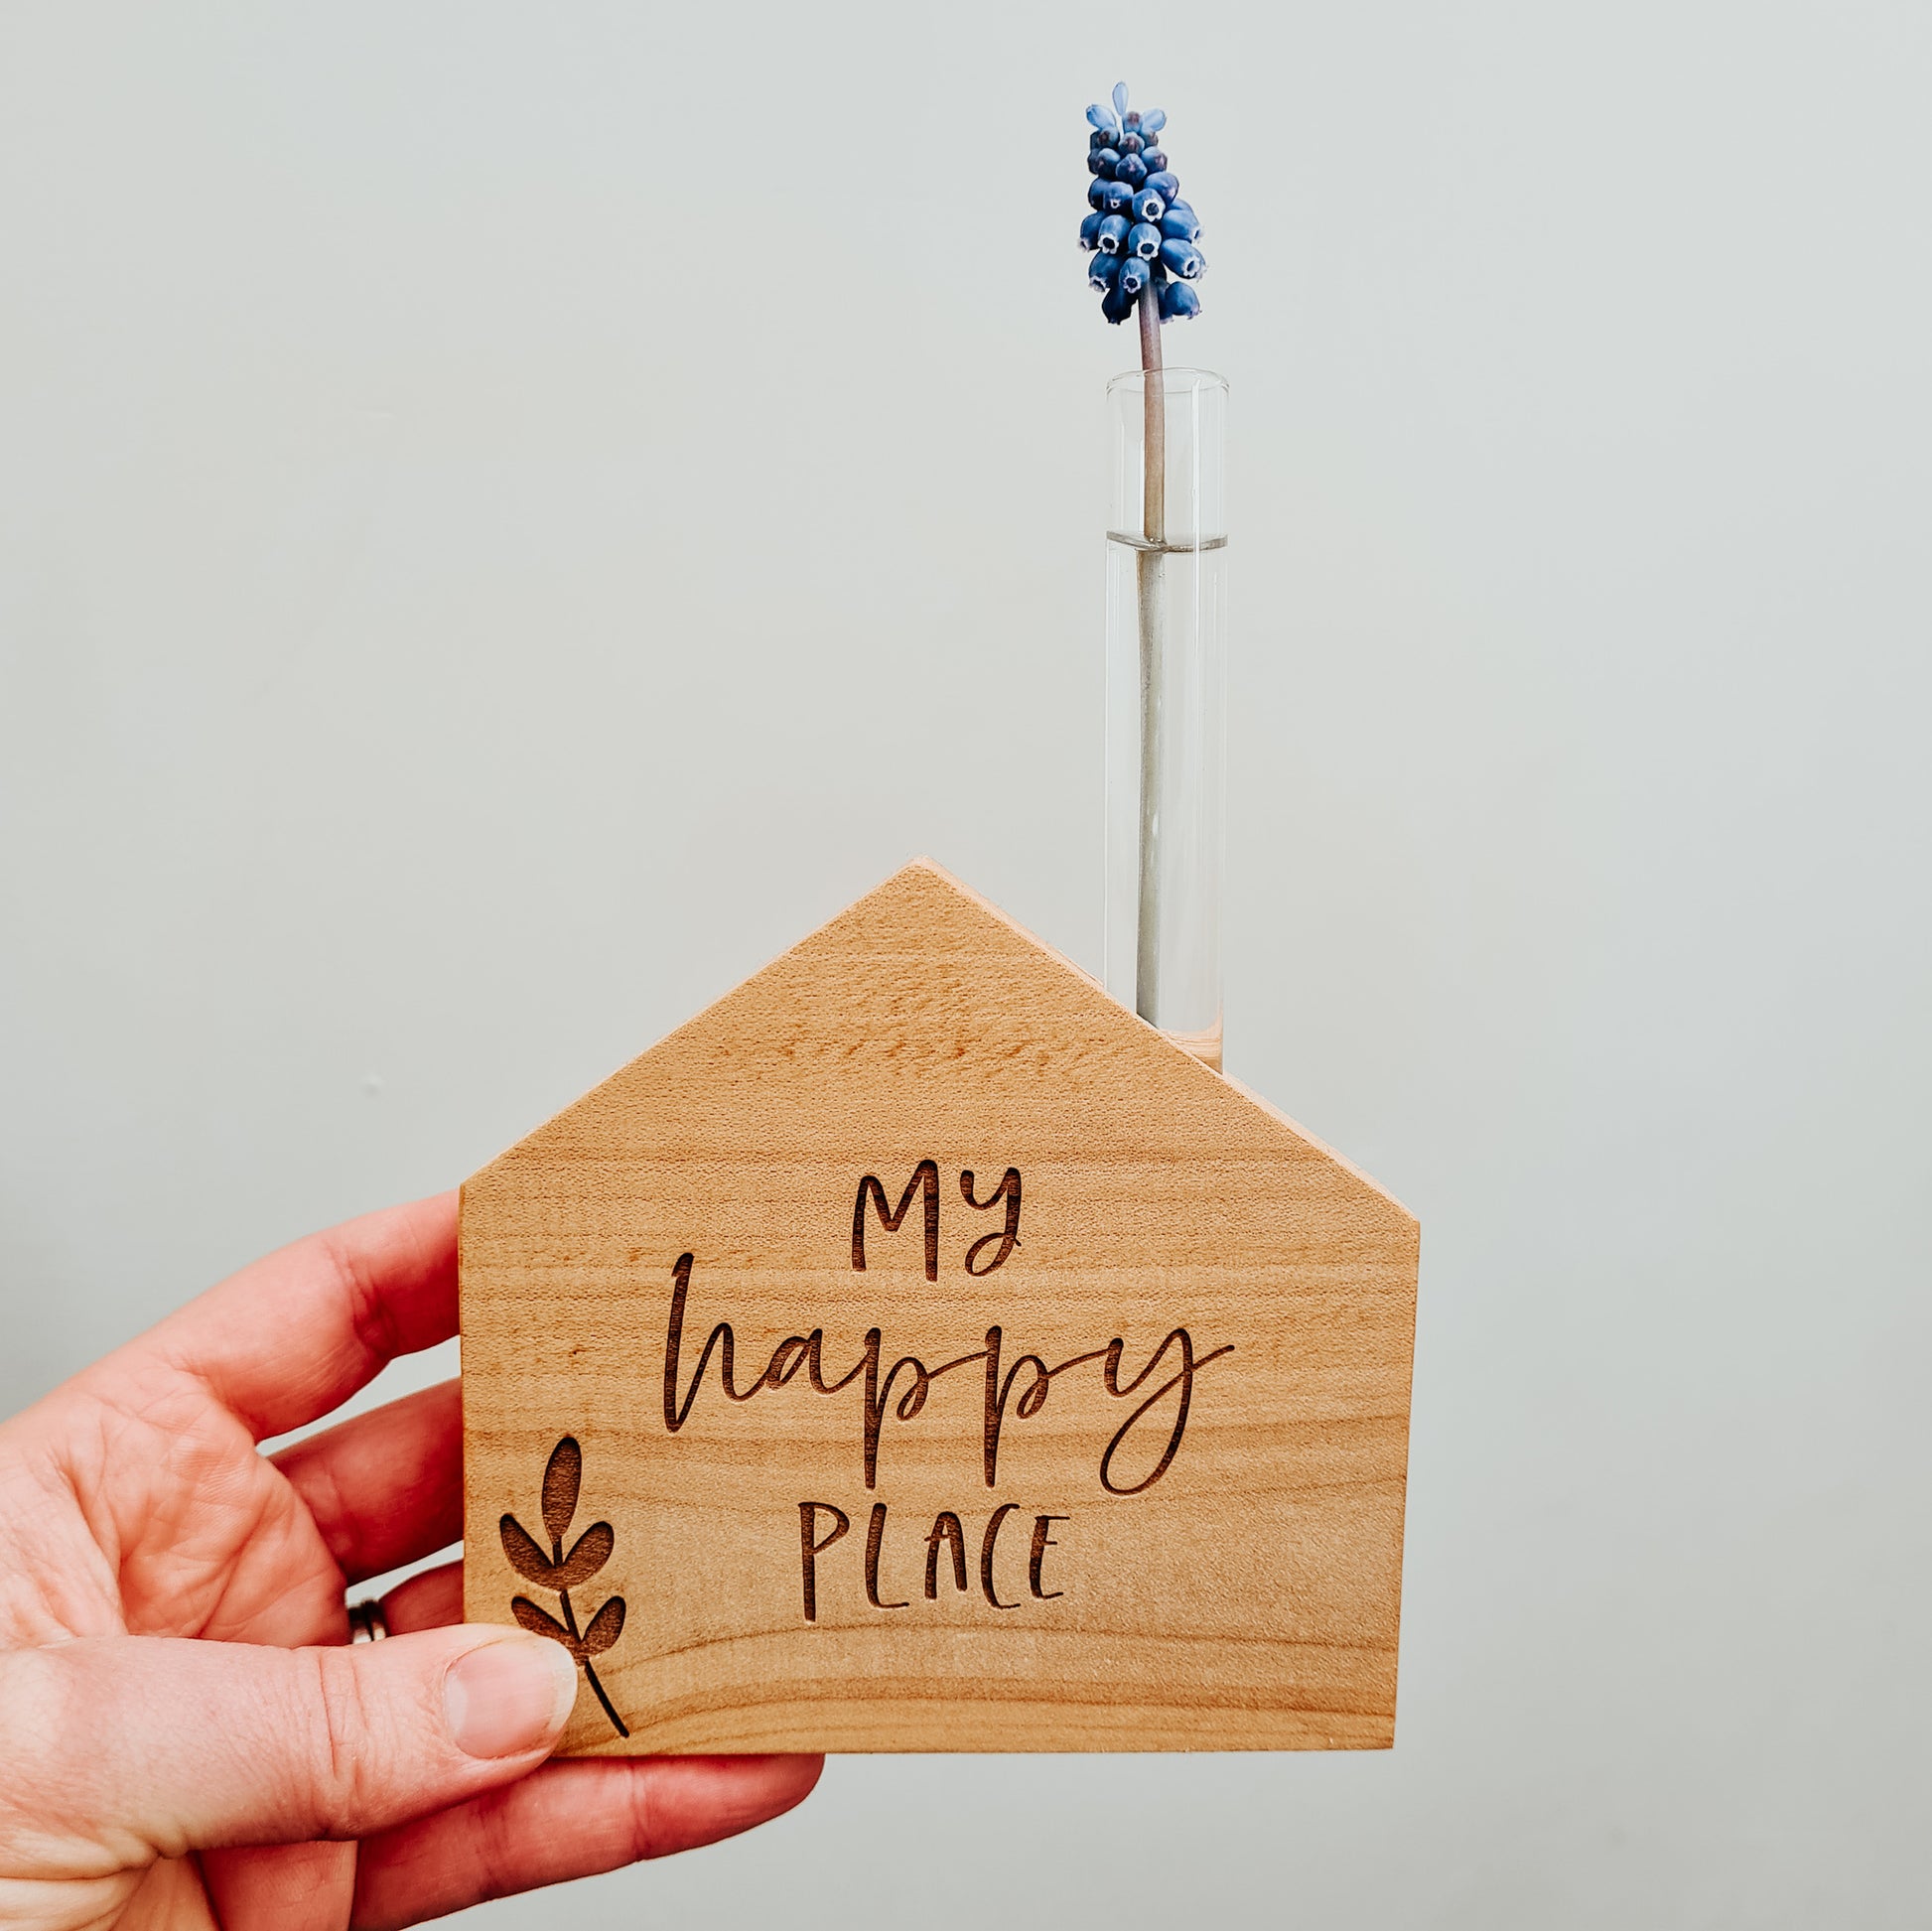 Wooden house shaped vase with test tube holding a single cut flower, engraved with the words my happy place